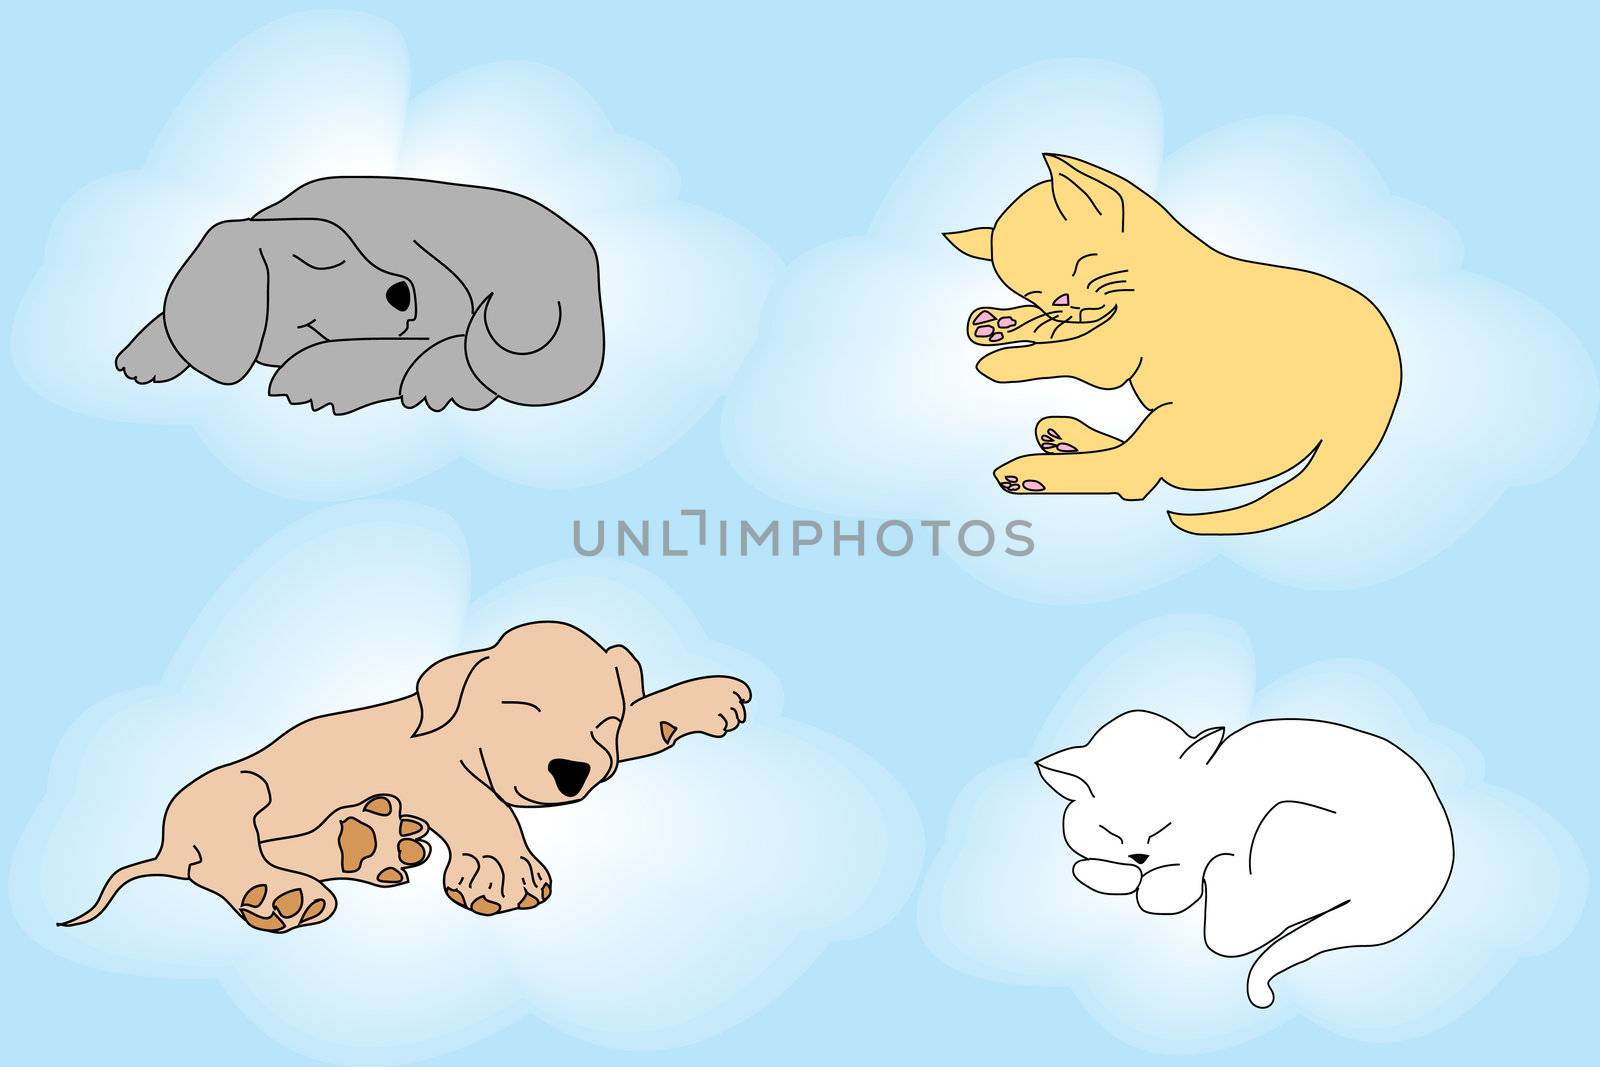 Cute background with sleepy cats and dogs by hibrida13